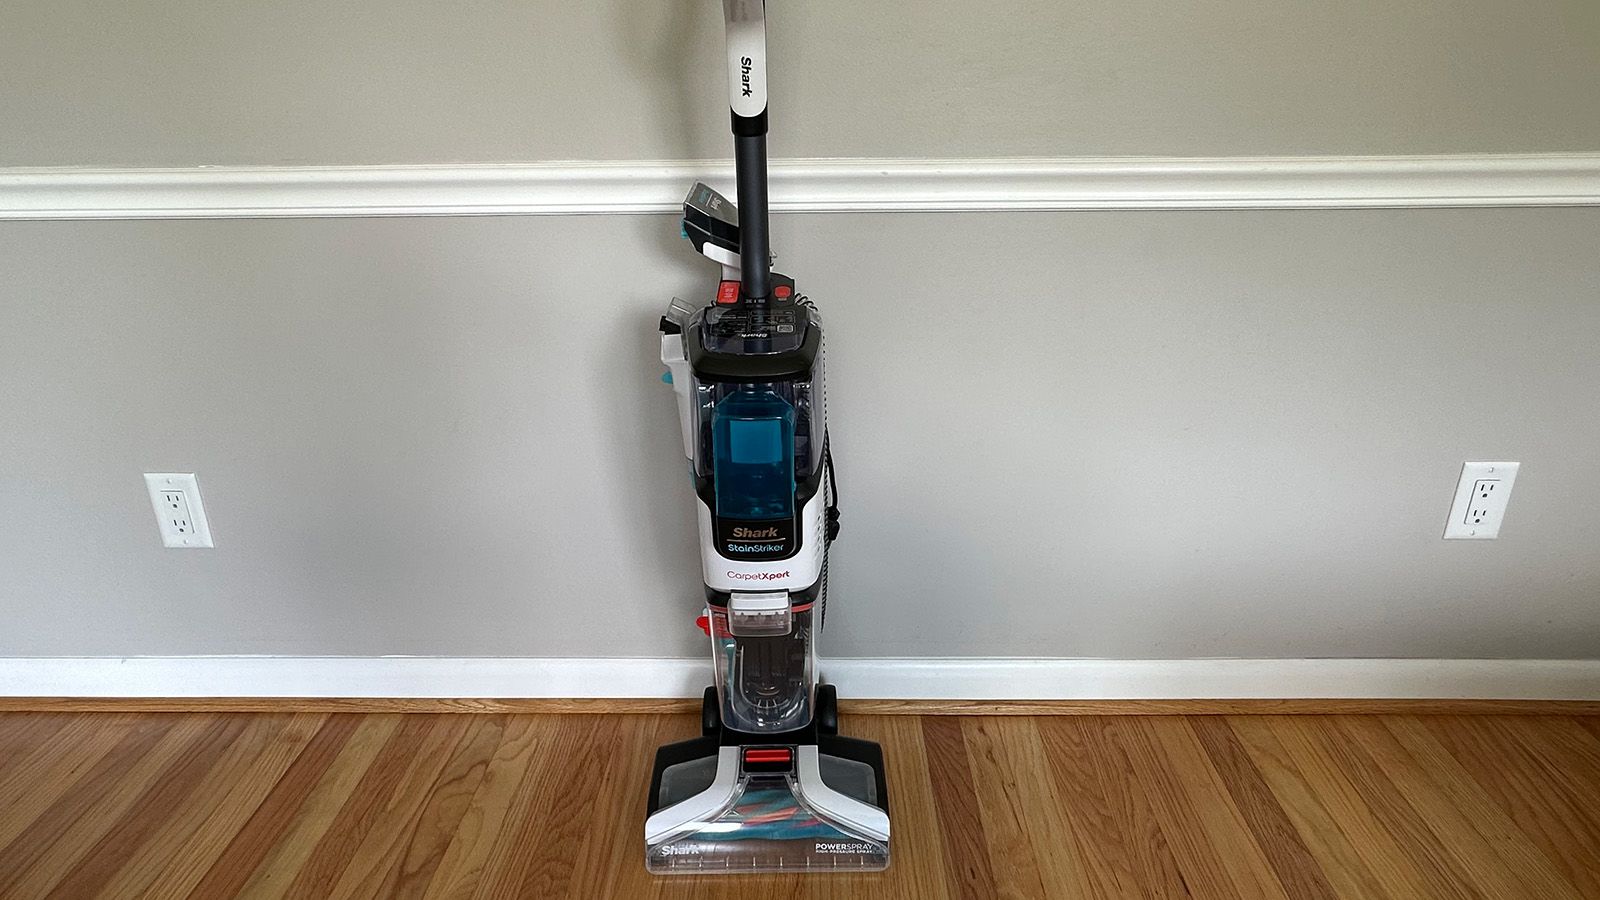 5 Best Carpet Cleaner for 2023 - Top-Rated Carpet Cleaning Machines